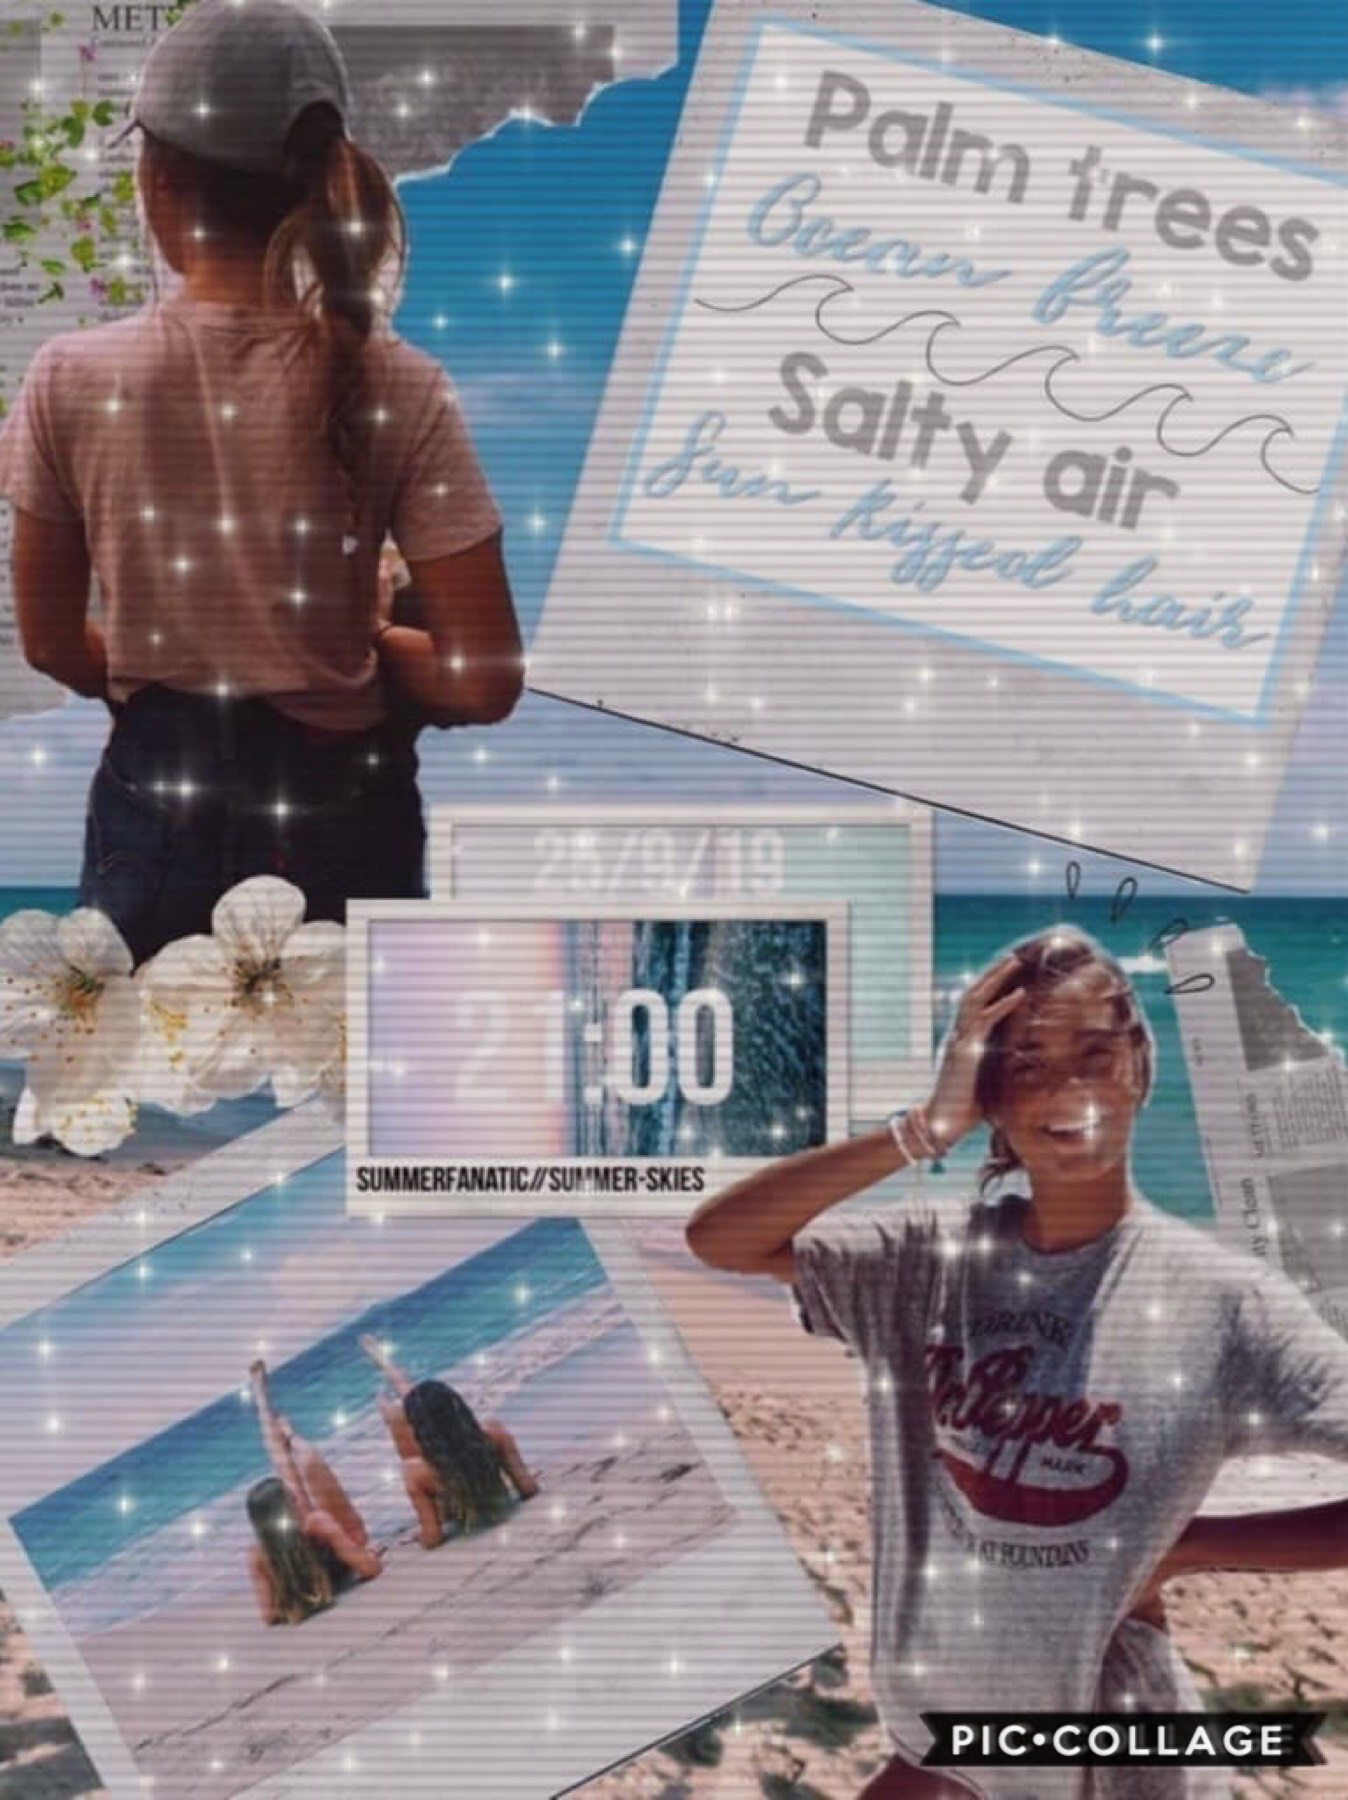 🌊COLLAB WITH...🌊

The amazing SummerFanatic! Go follow her she’s so nice!!💓Her collages are incredible!